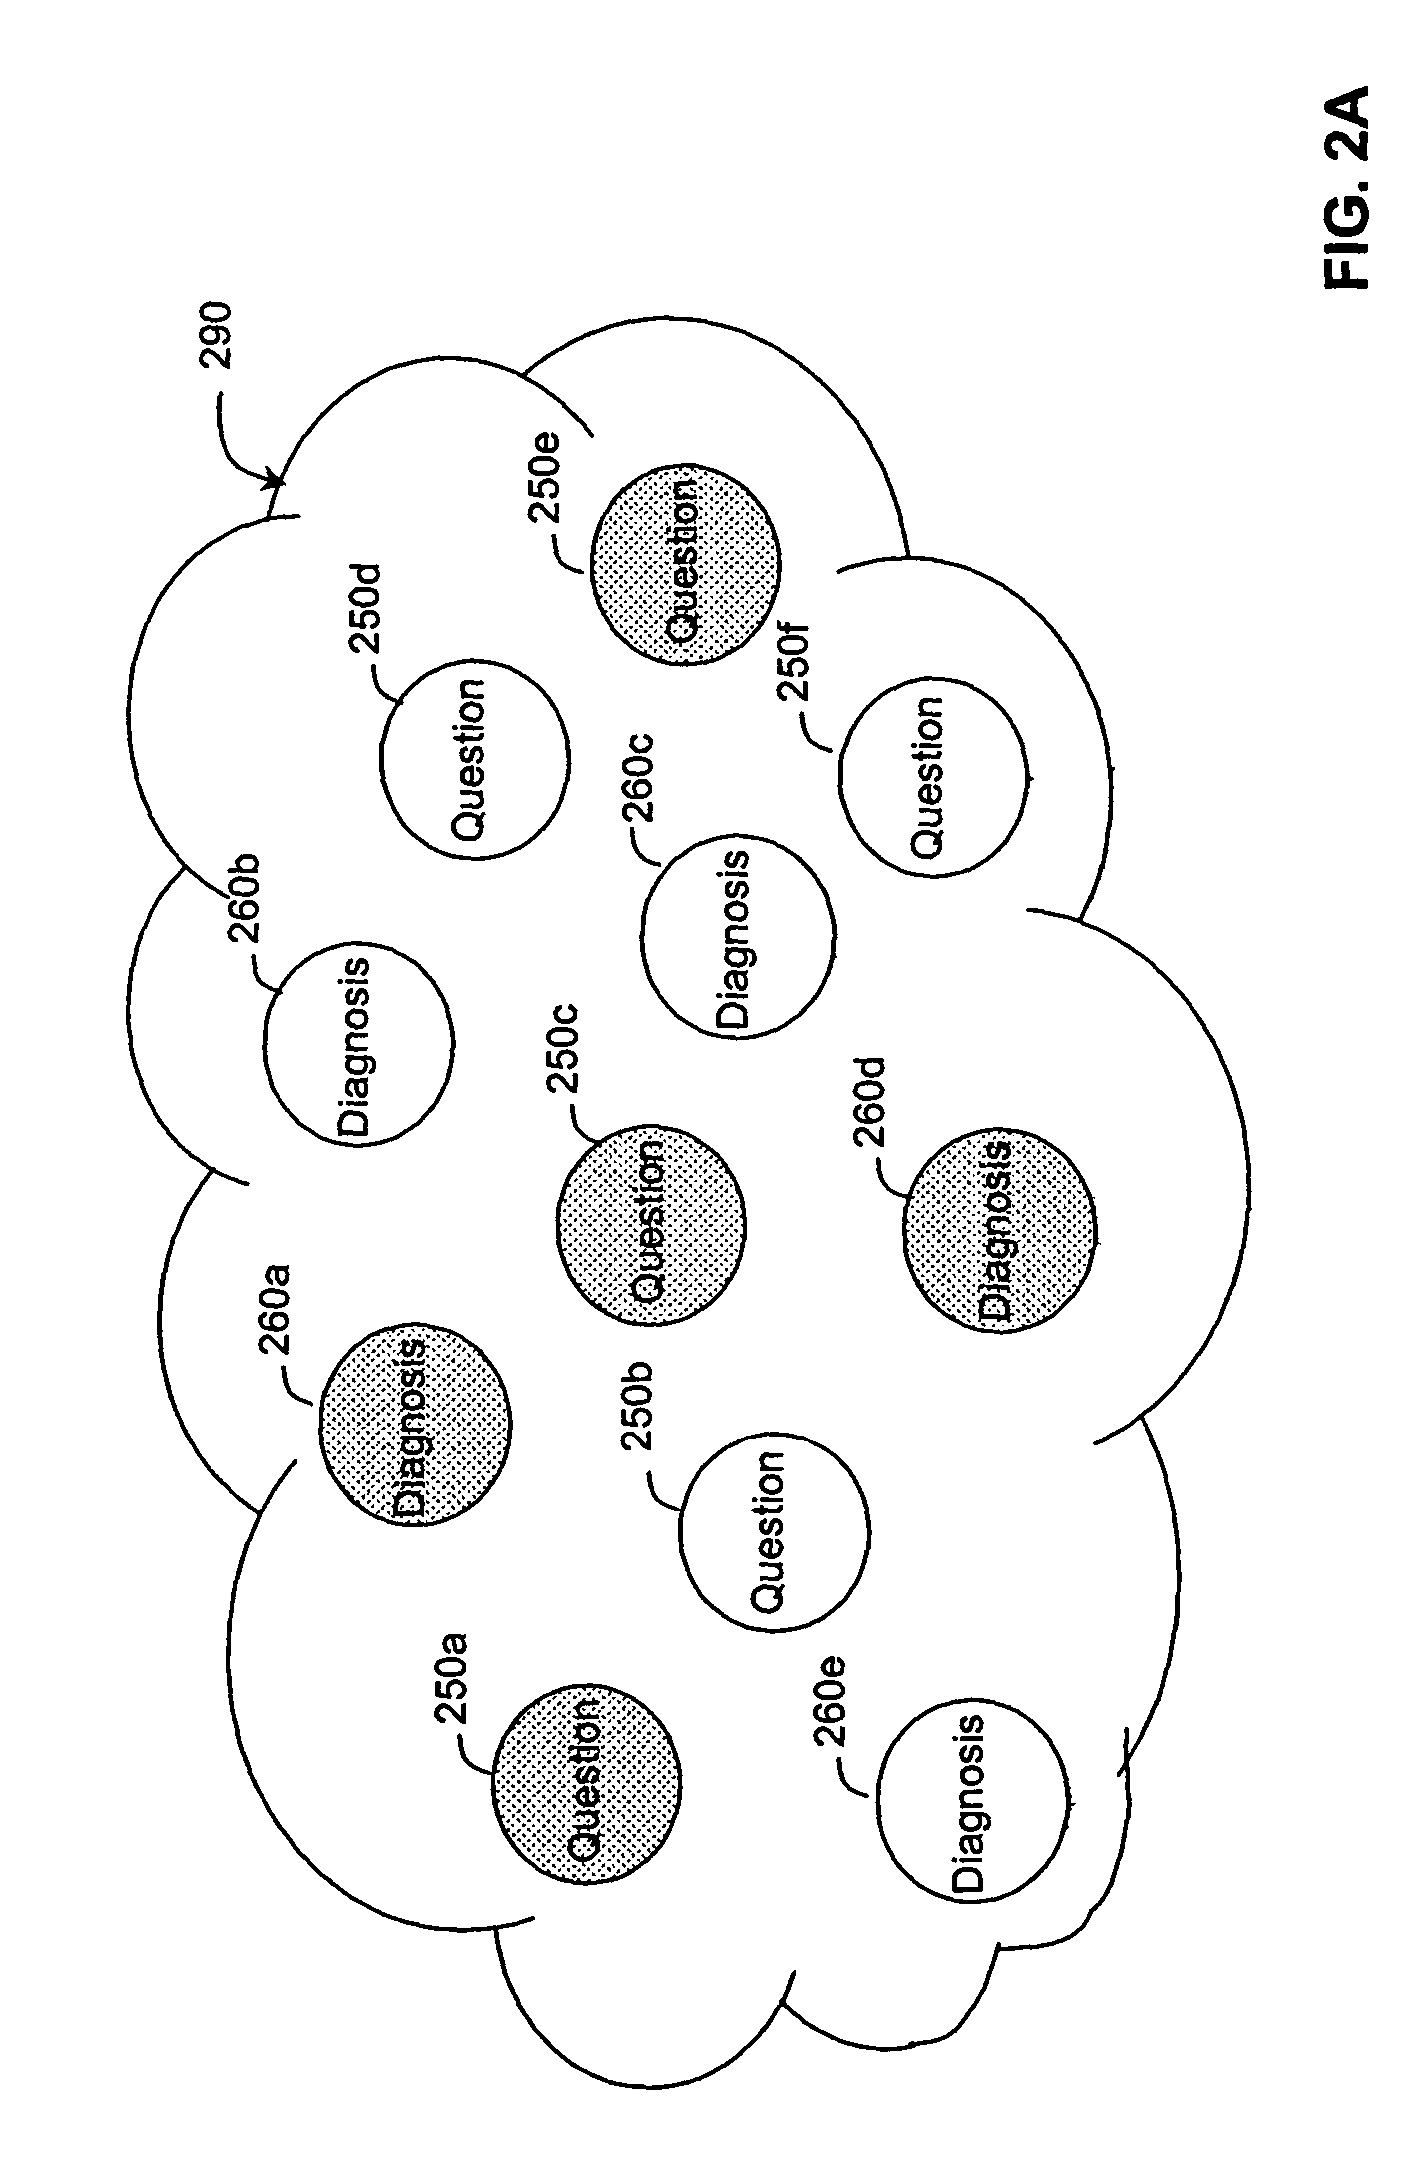 System and method for networked decision making support